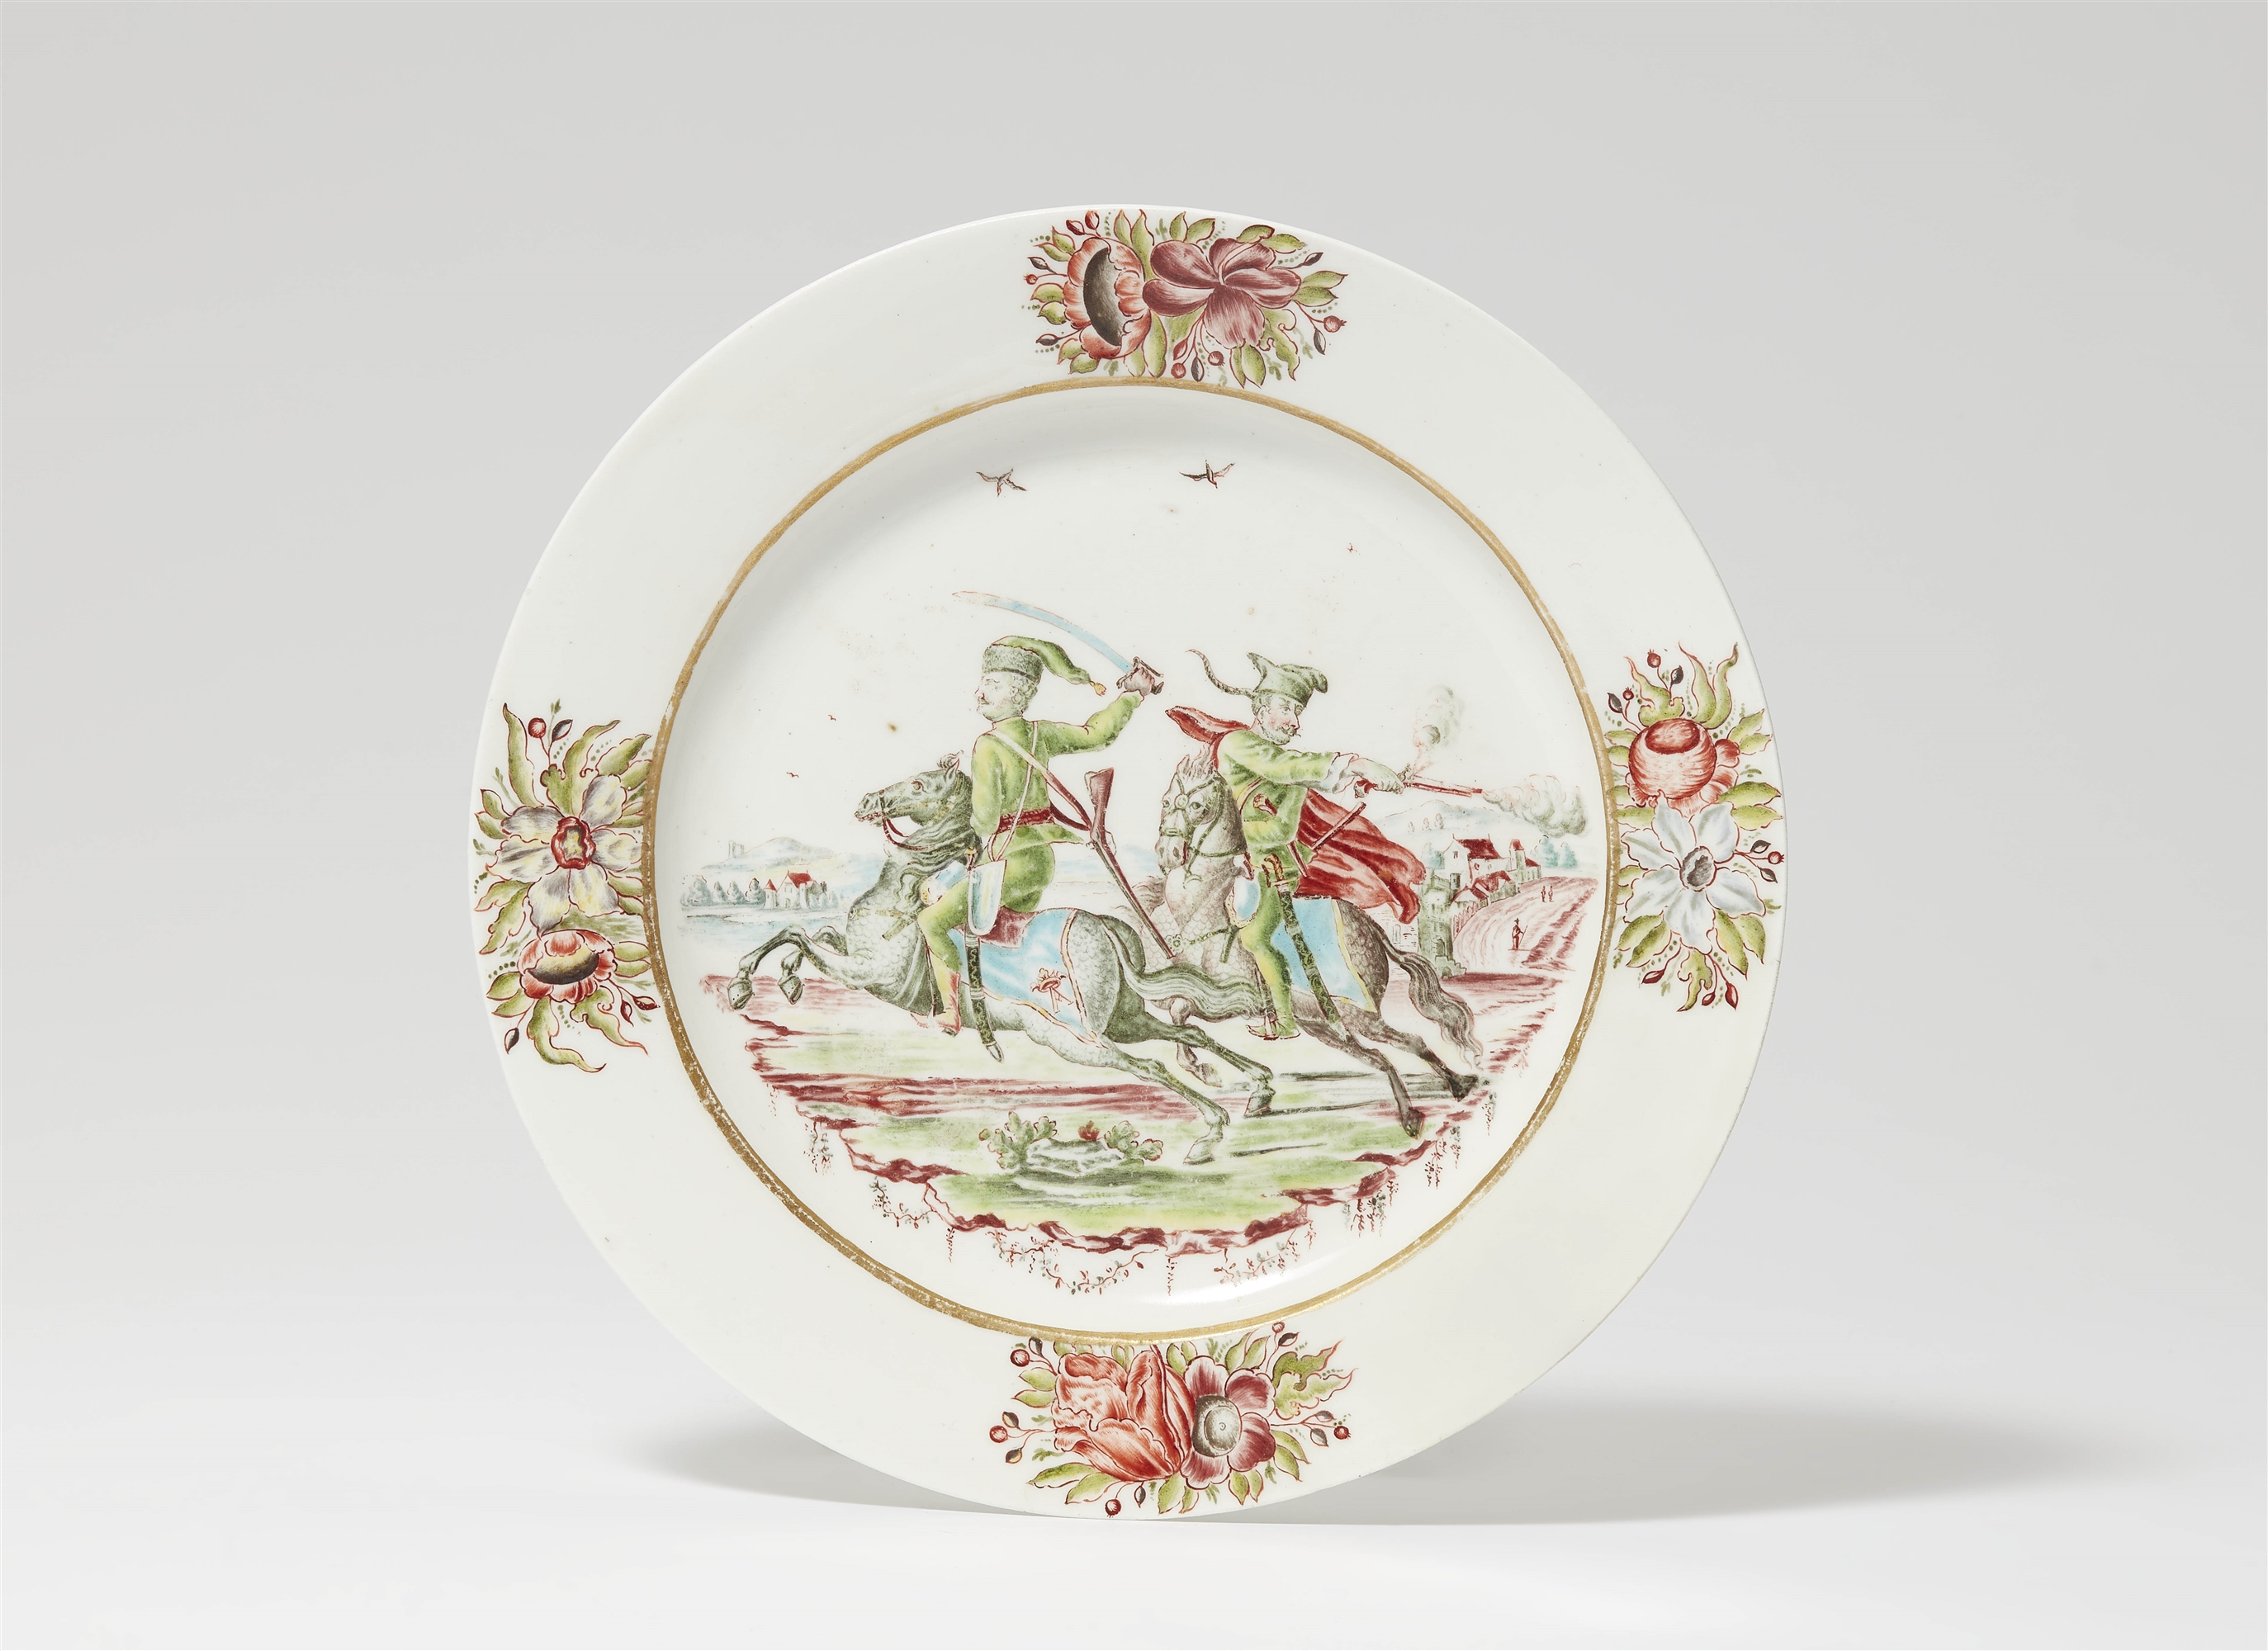 A Meissen porcelain plate with hussars